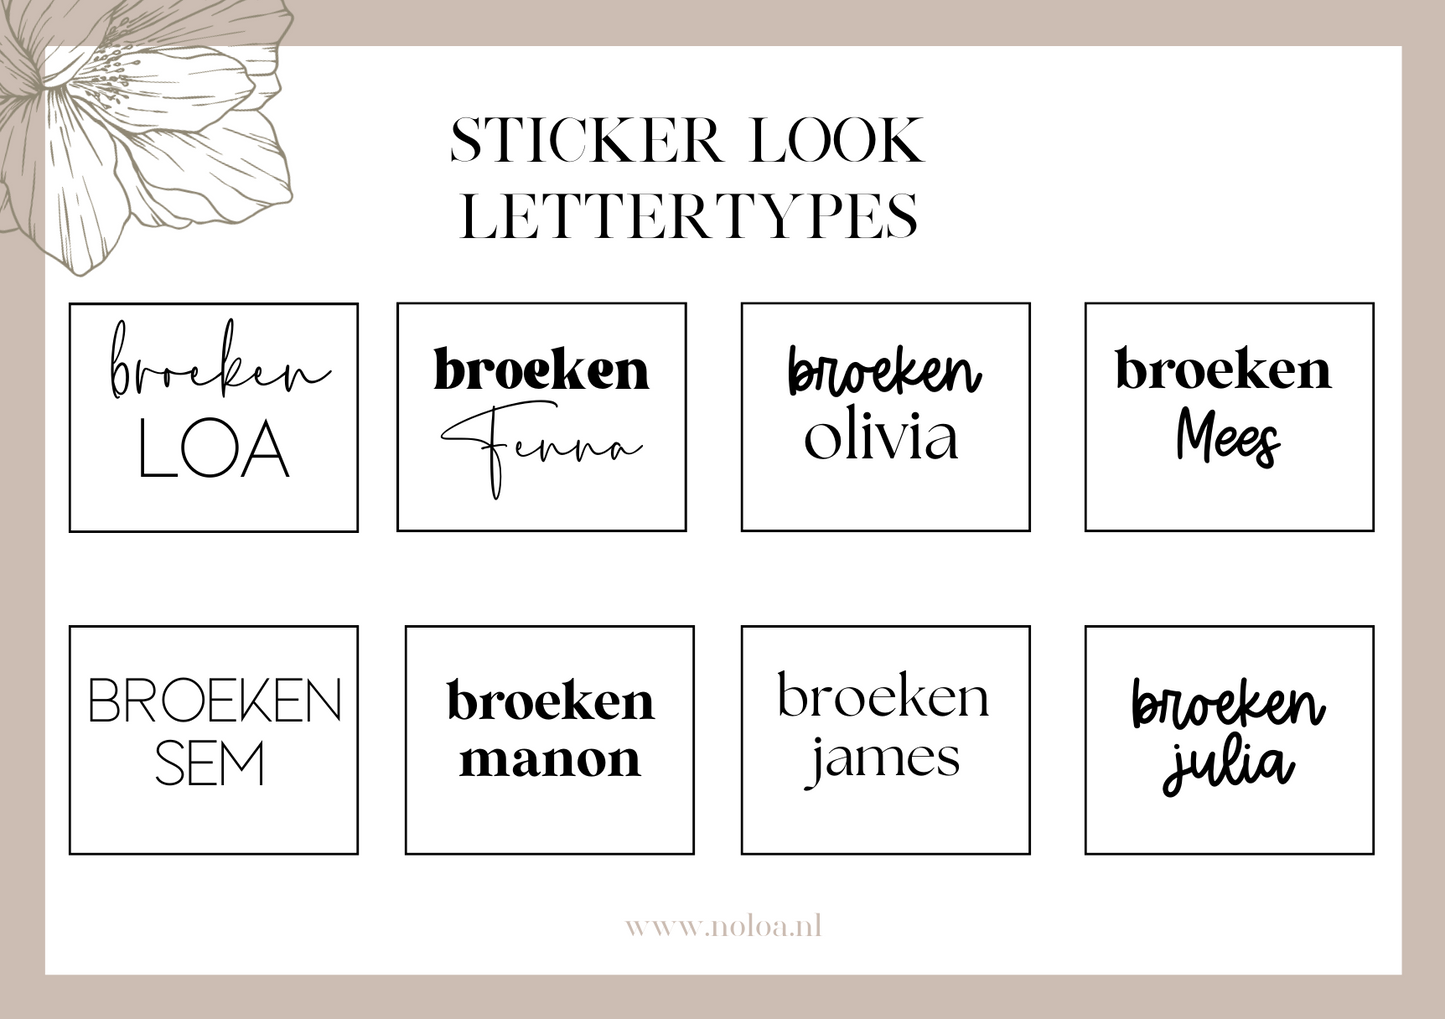 Lettertypes organizing stickers